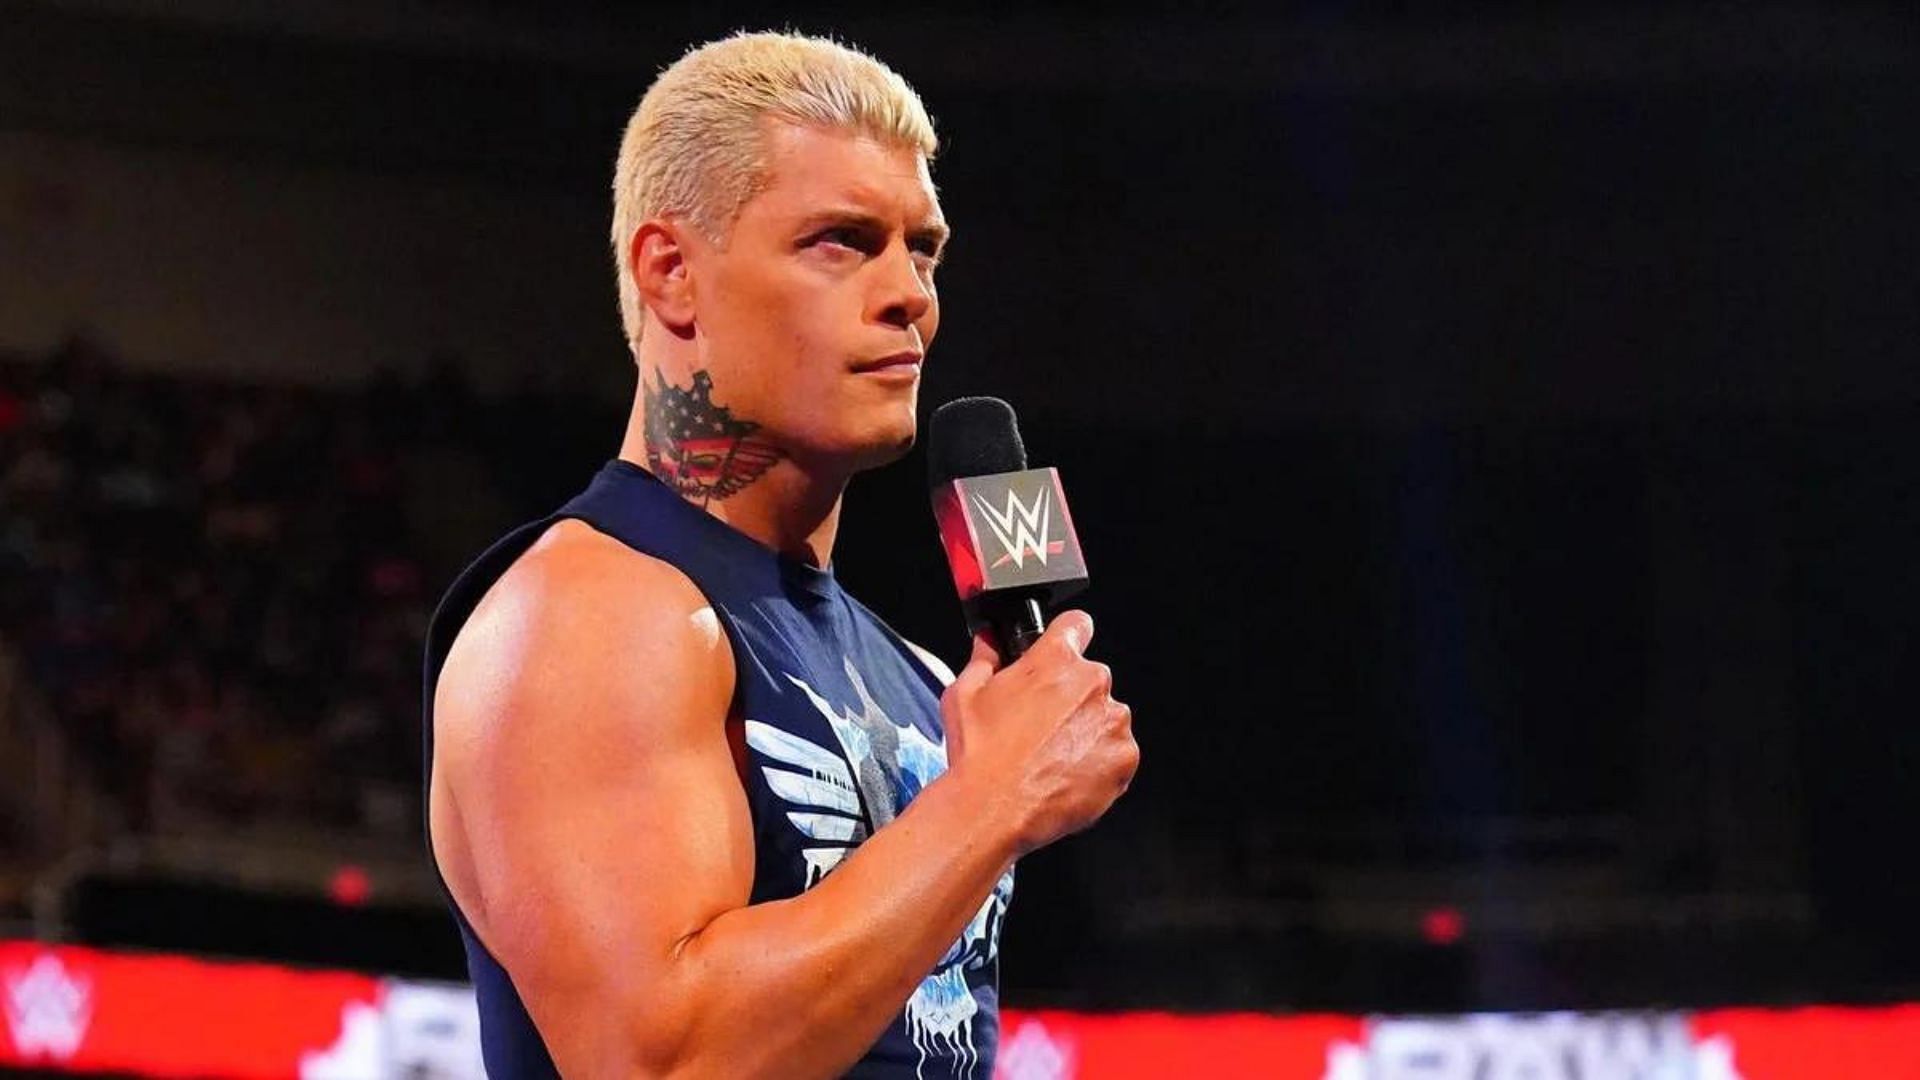 Cody Rhodes reacted to one of his former AEW colleagues departing